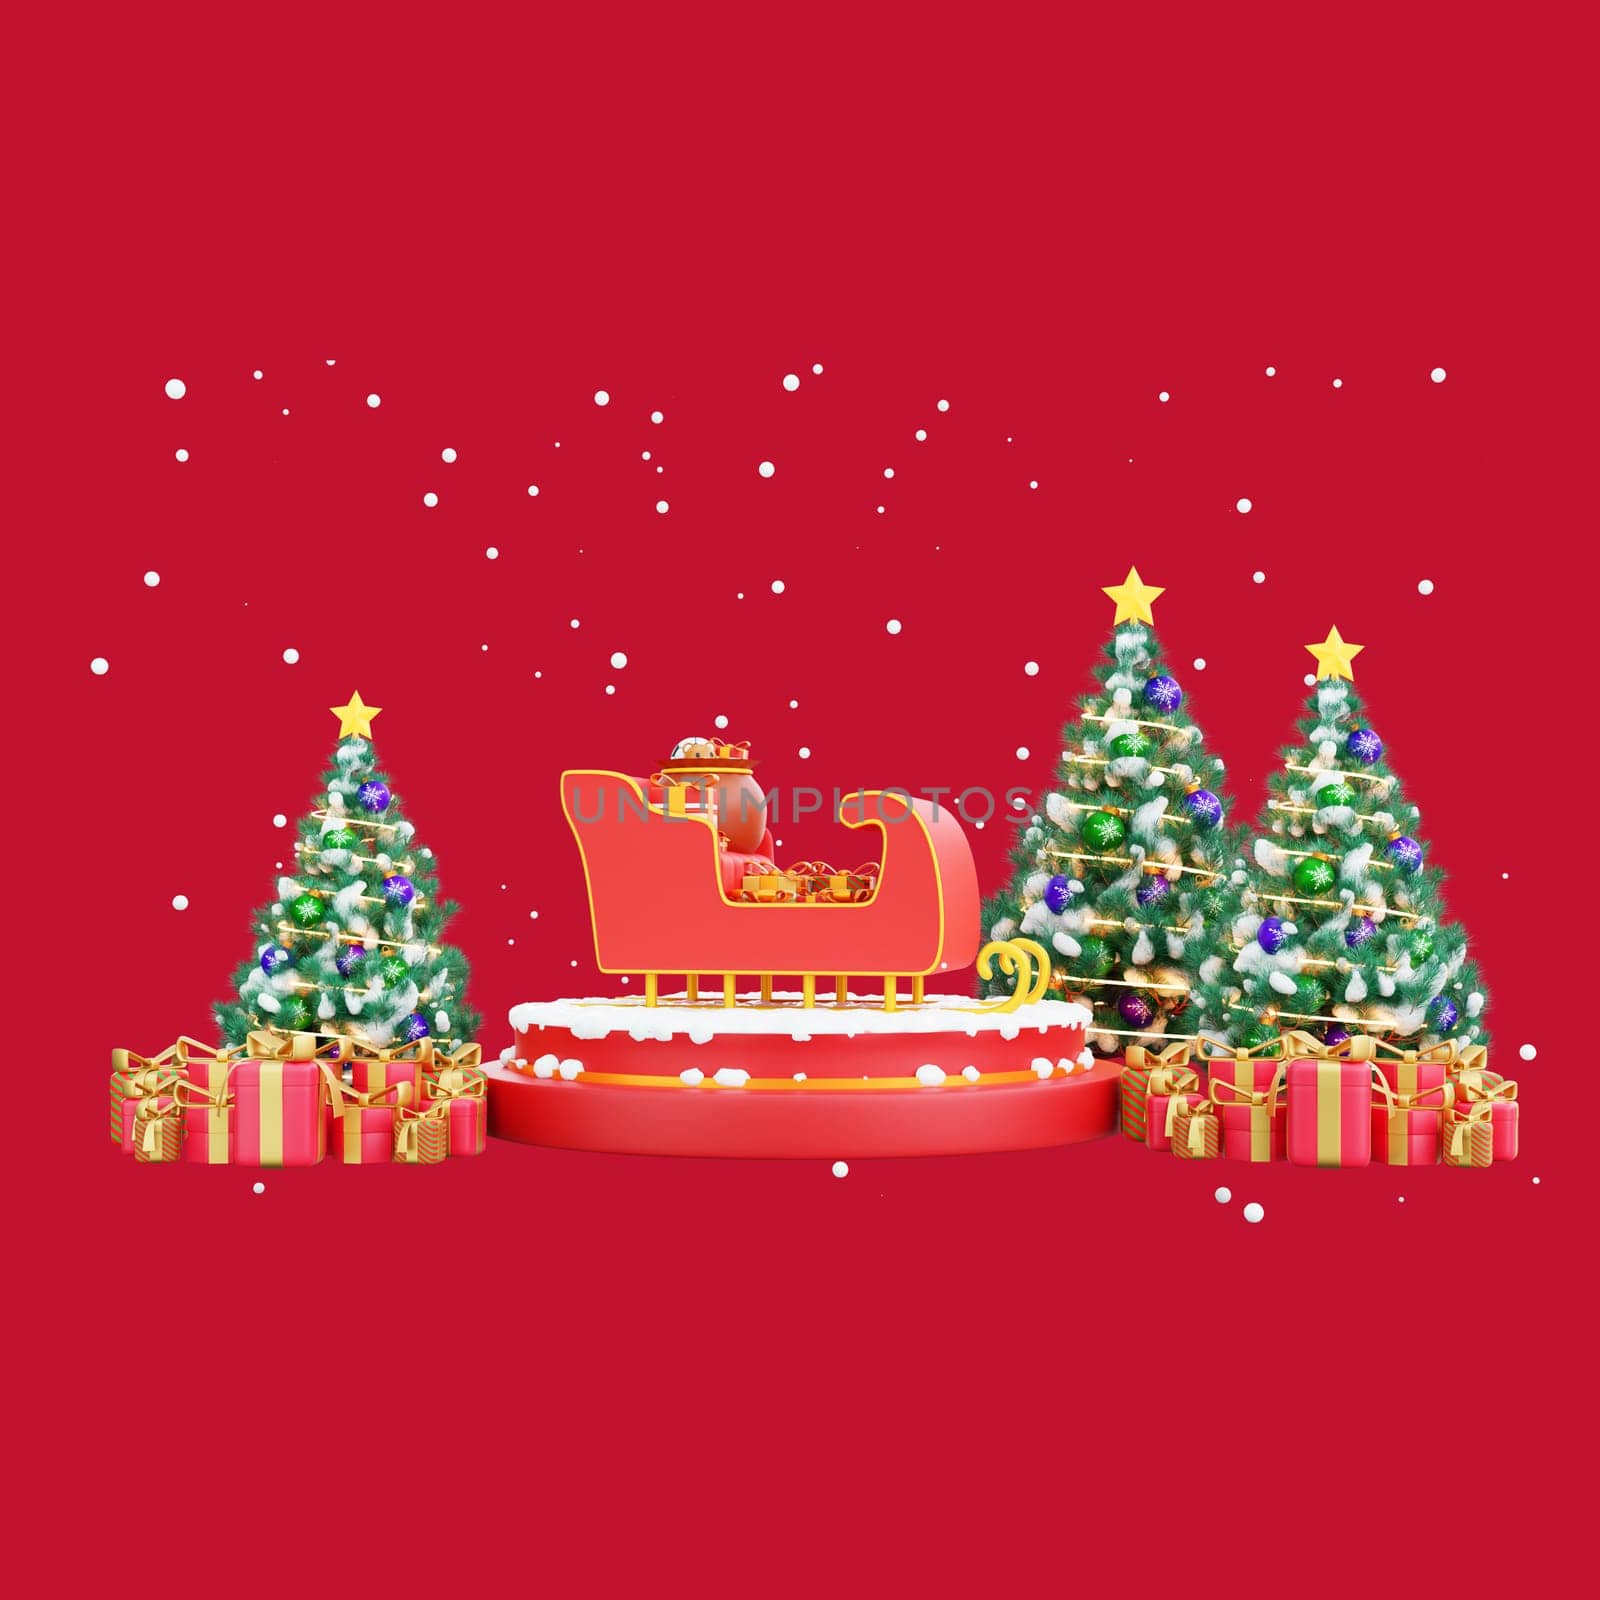 3D illustration festive Christmas scene. Features a sleigh, beautifully decorated trees, and an array of colorful presents. Perfect for Christmas and happy New Year celebrations